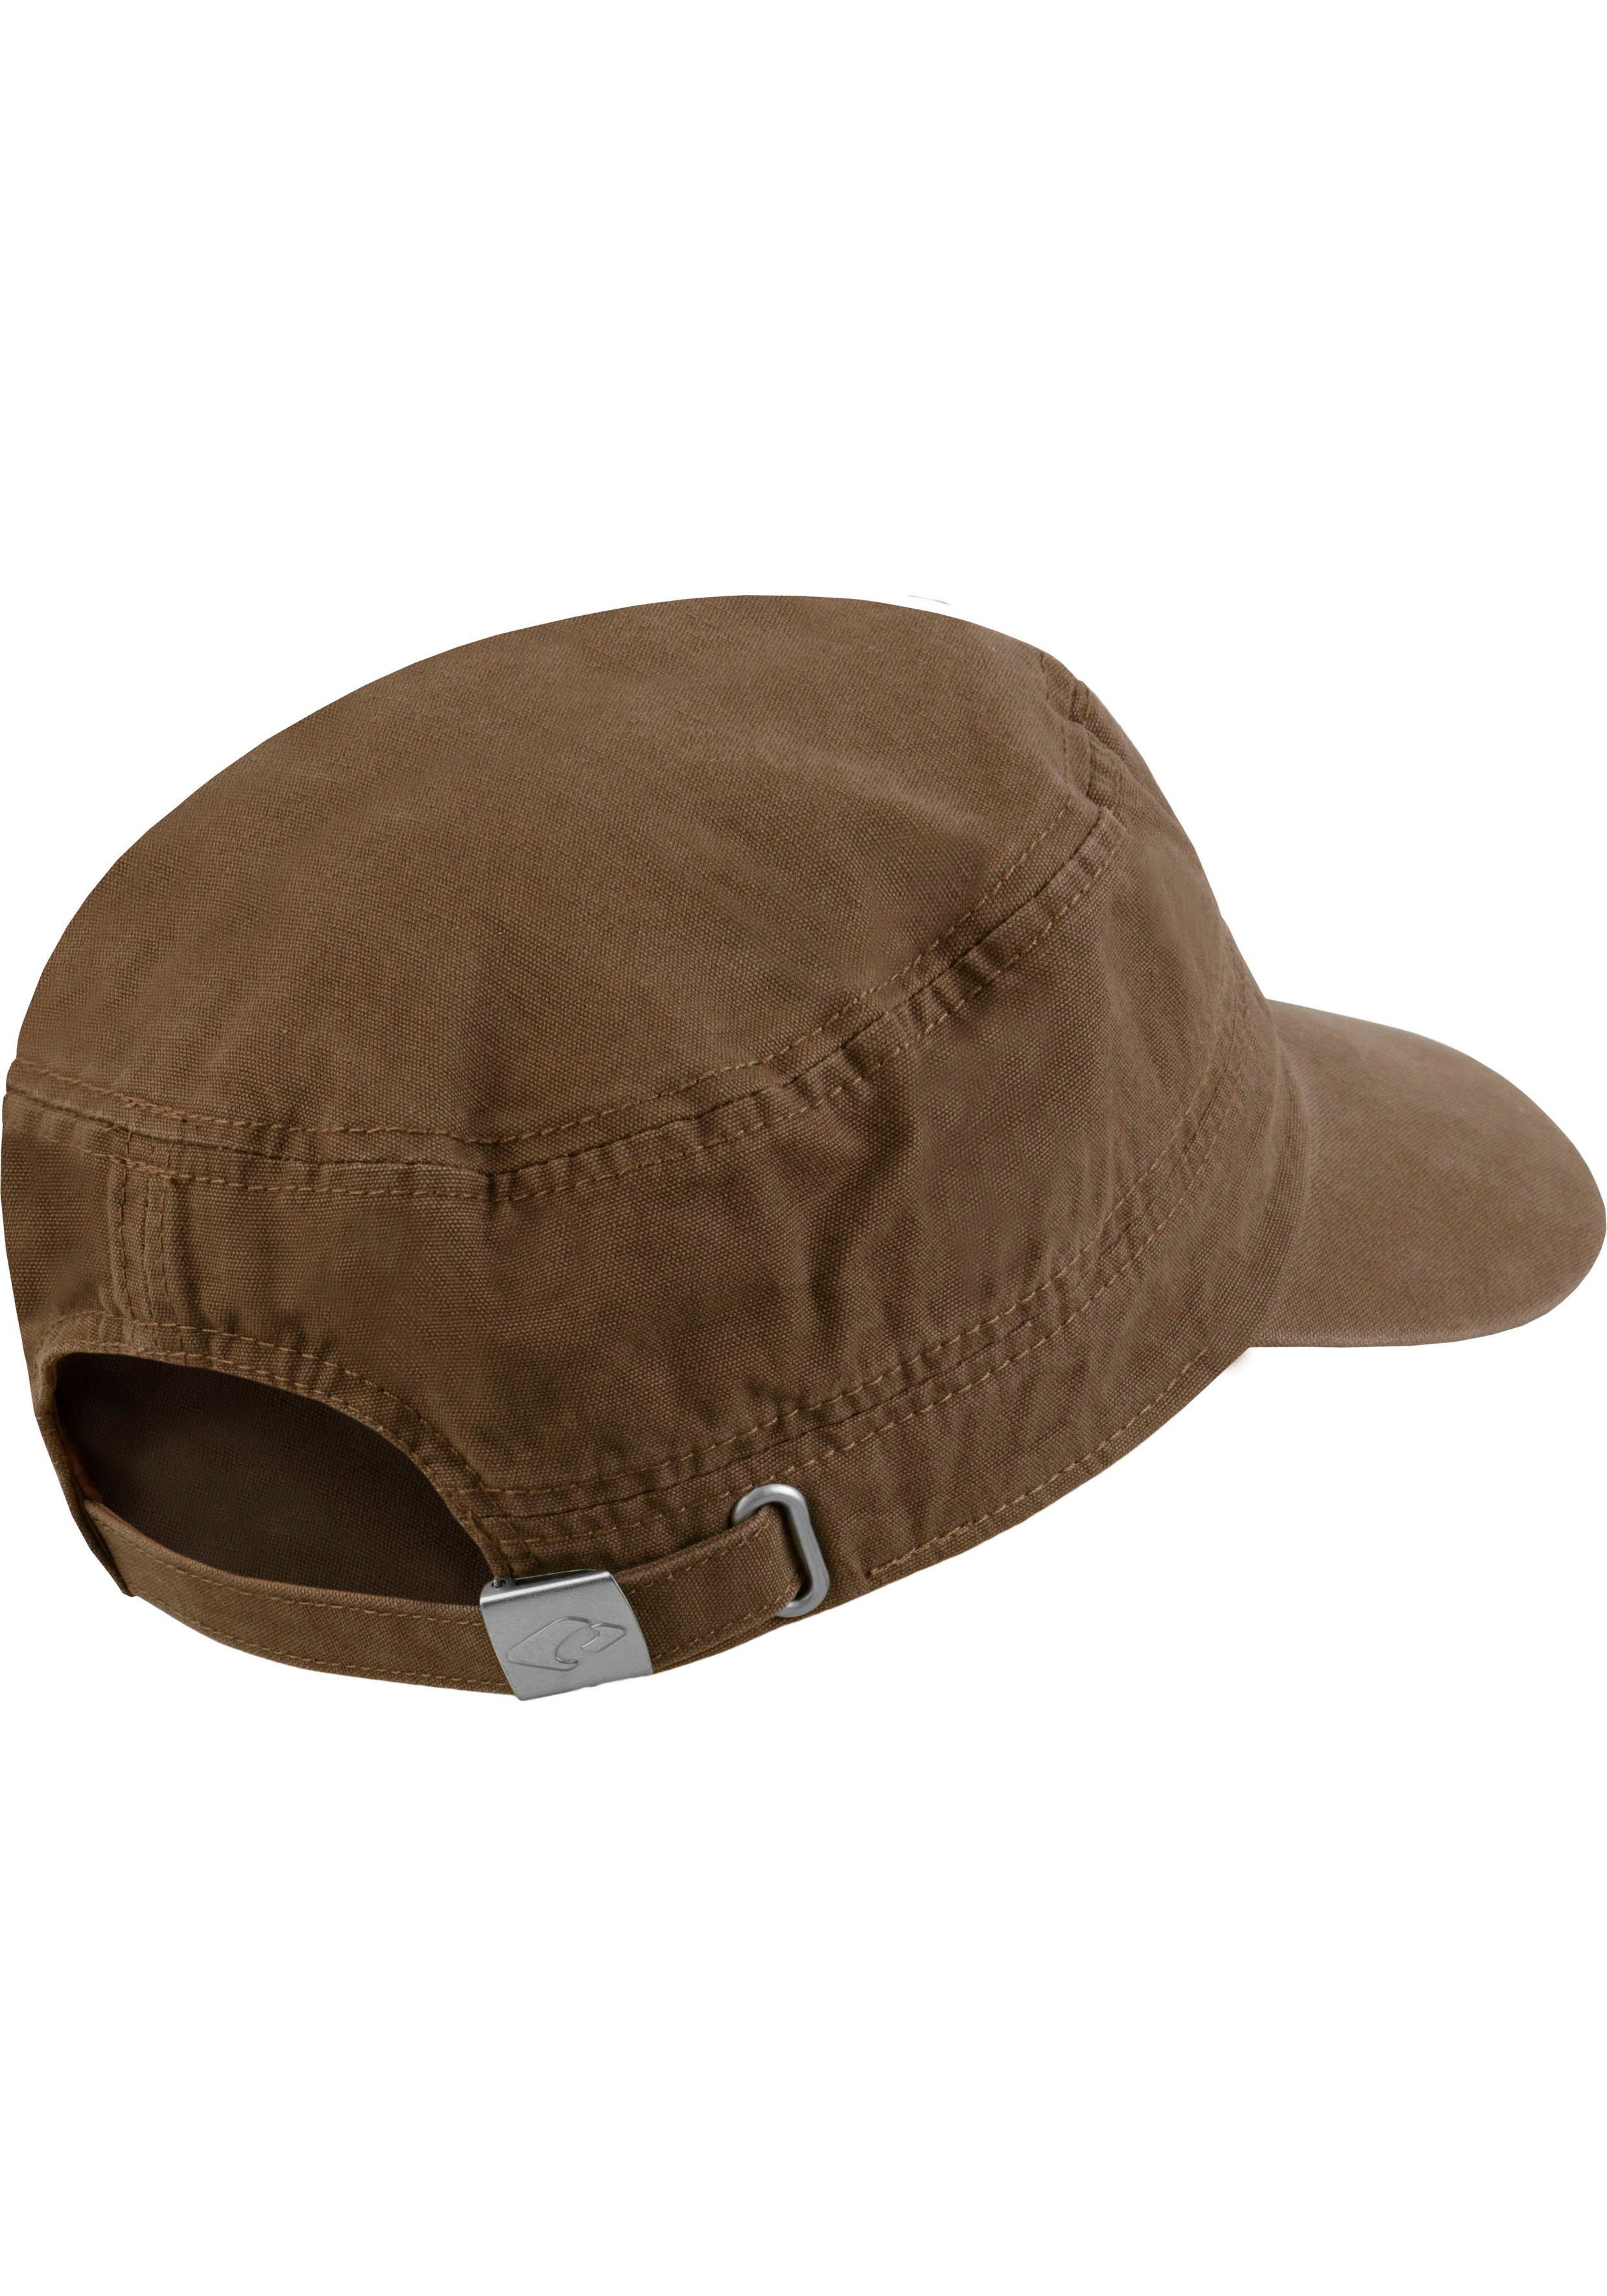 chillouts Army Mililtary-Style Dublin Cap Hat im Cap braun